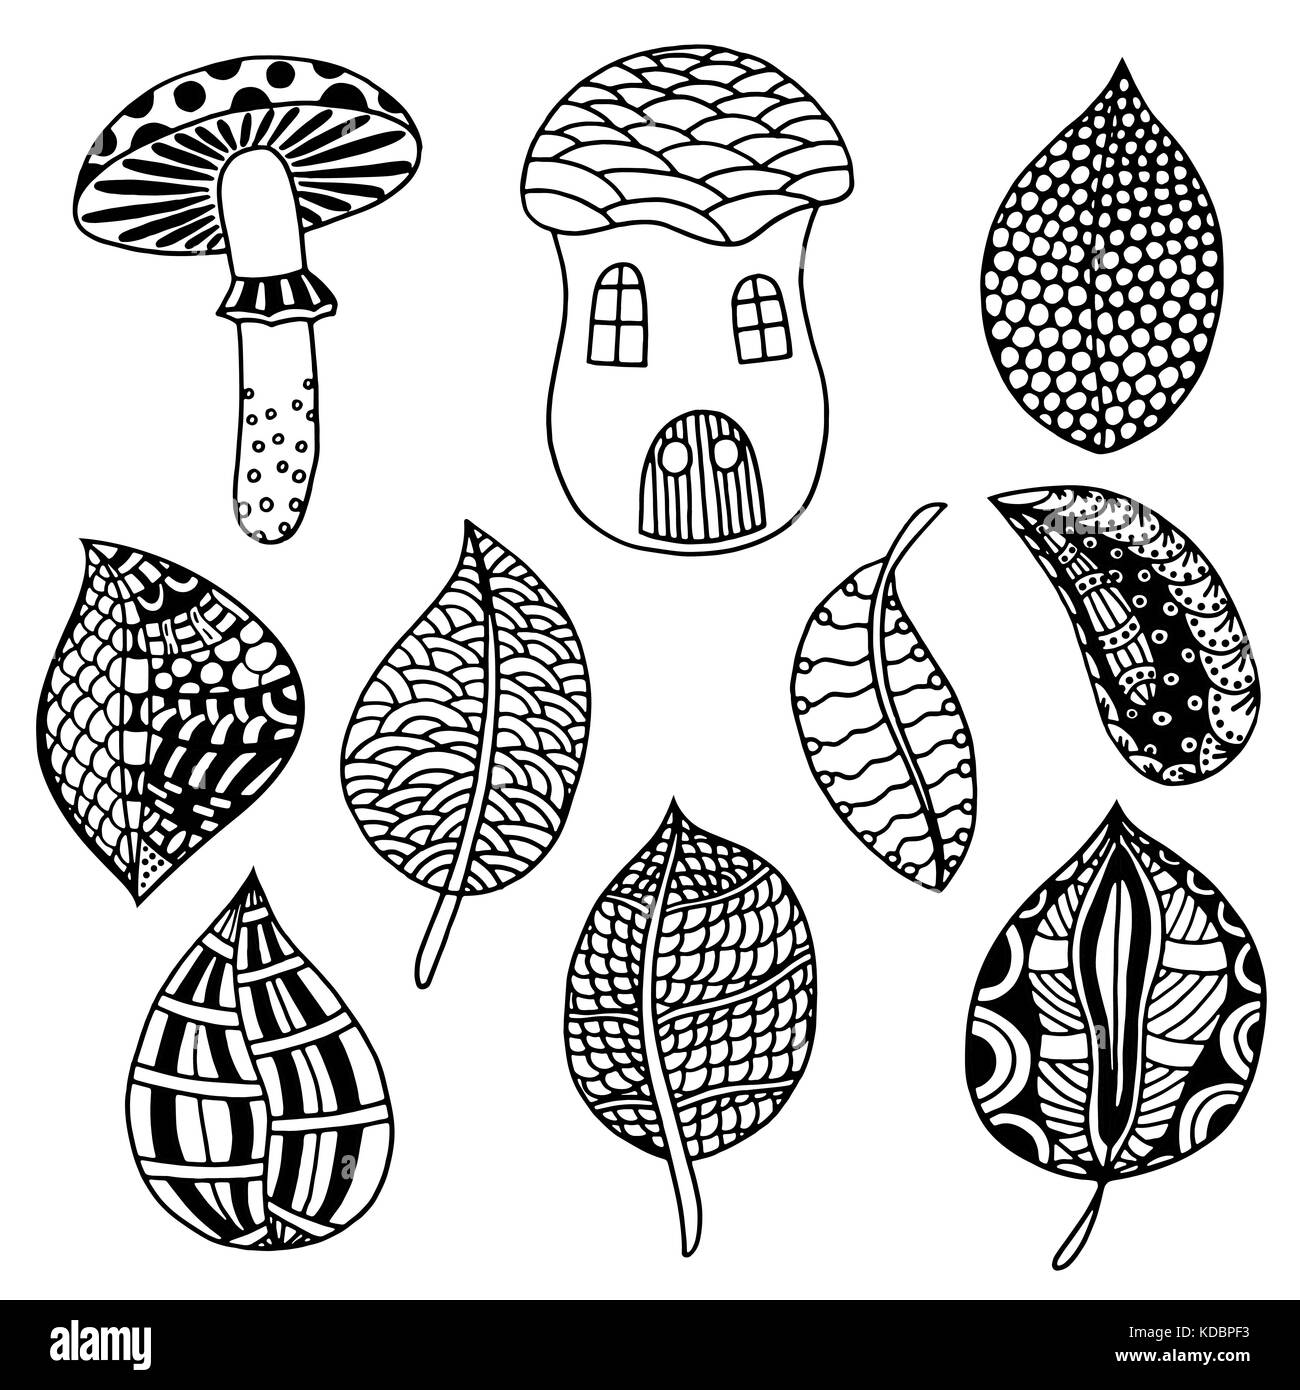 Nature elements vector set in doodle style. Floral, ornate, decorative, tribal, forest design elements. Black and white illustration. Grass, mushrooms Stock Vector